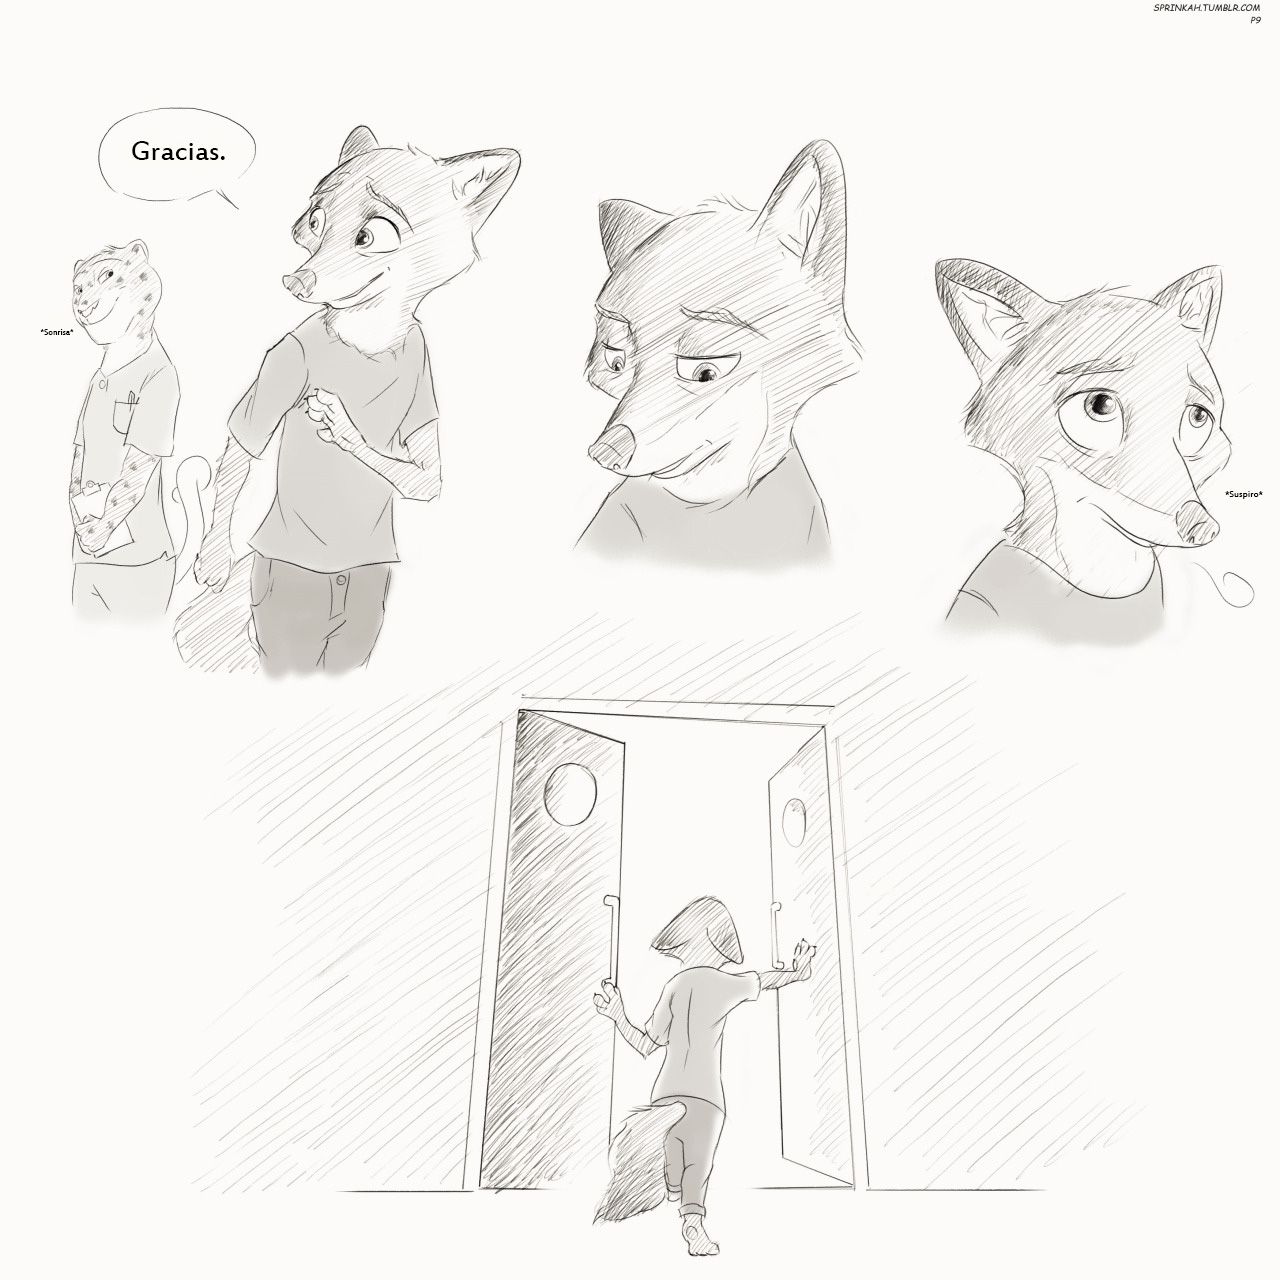 [Sprinkah] This is what true love looks like (Zootopia) (Spanish) (On Going) [Landsec] http://sprinkah.tumblr.com/ 14